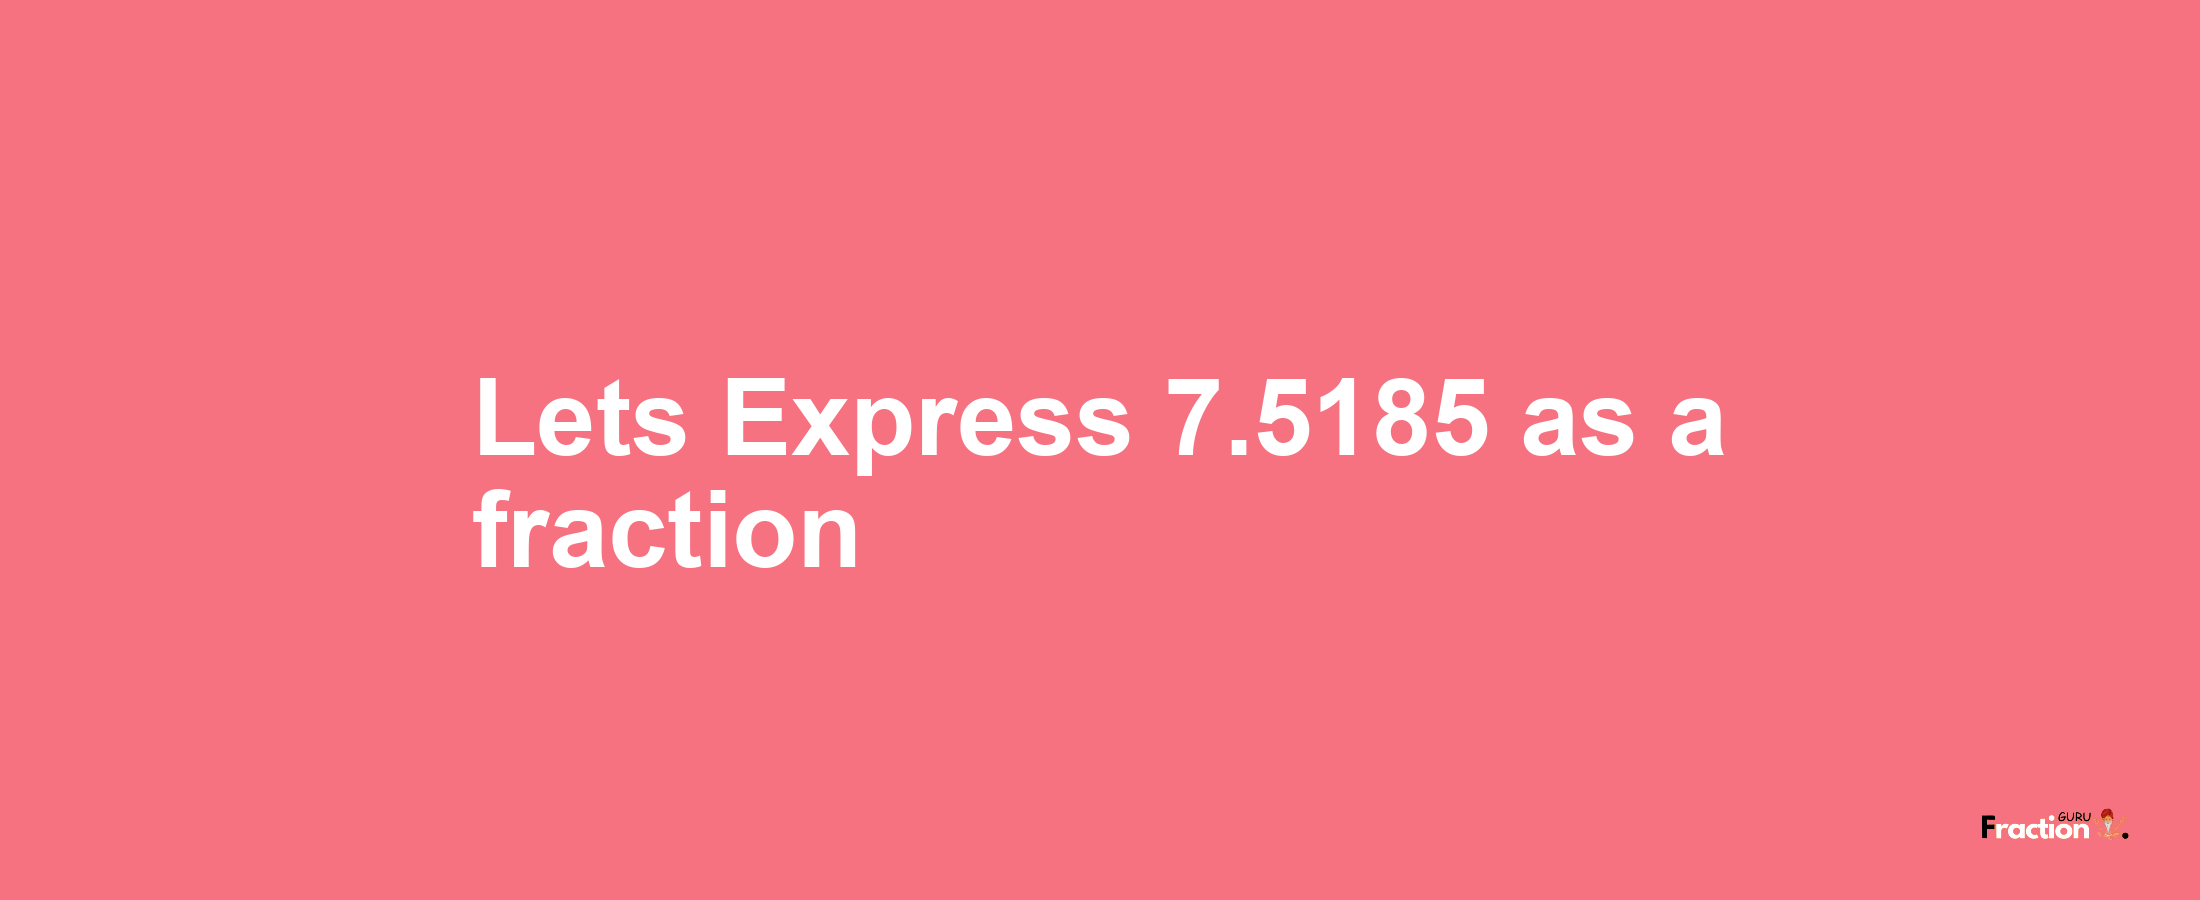 Lets Express 7.5185 as afraction